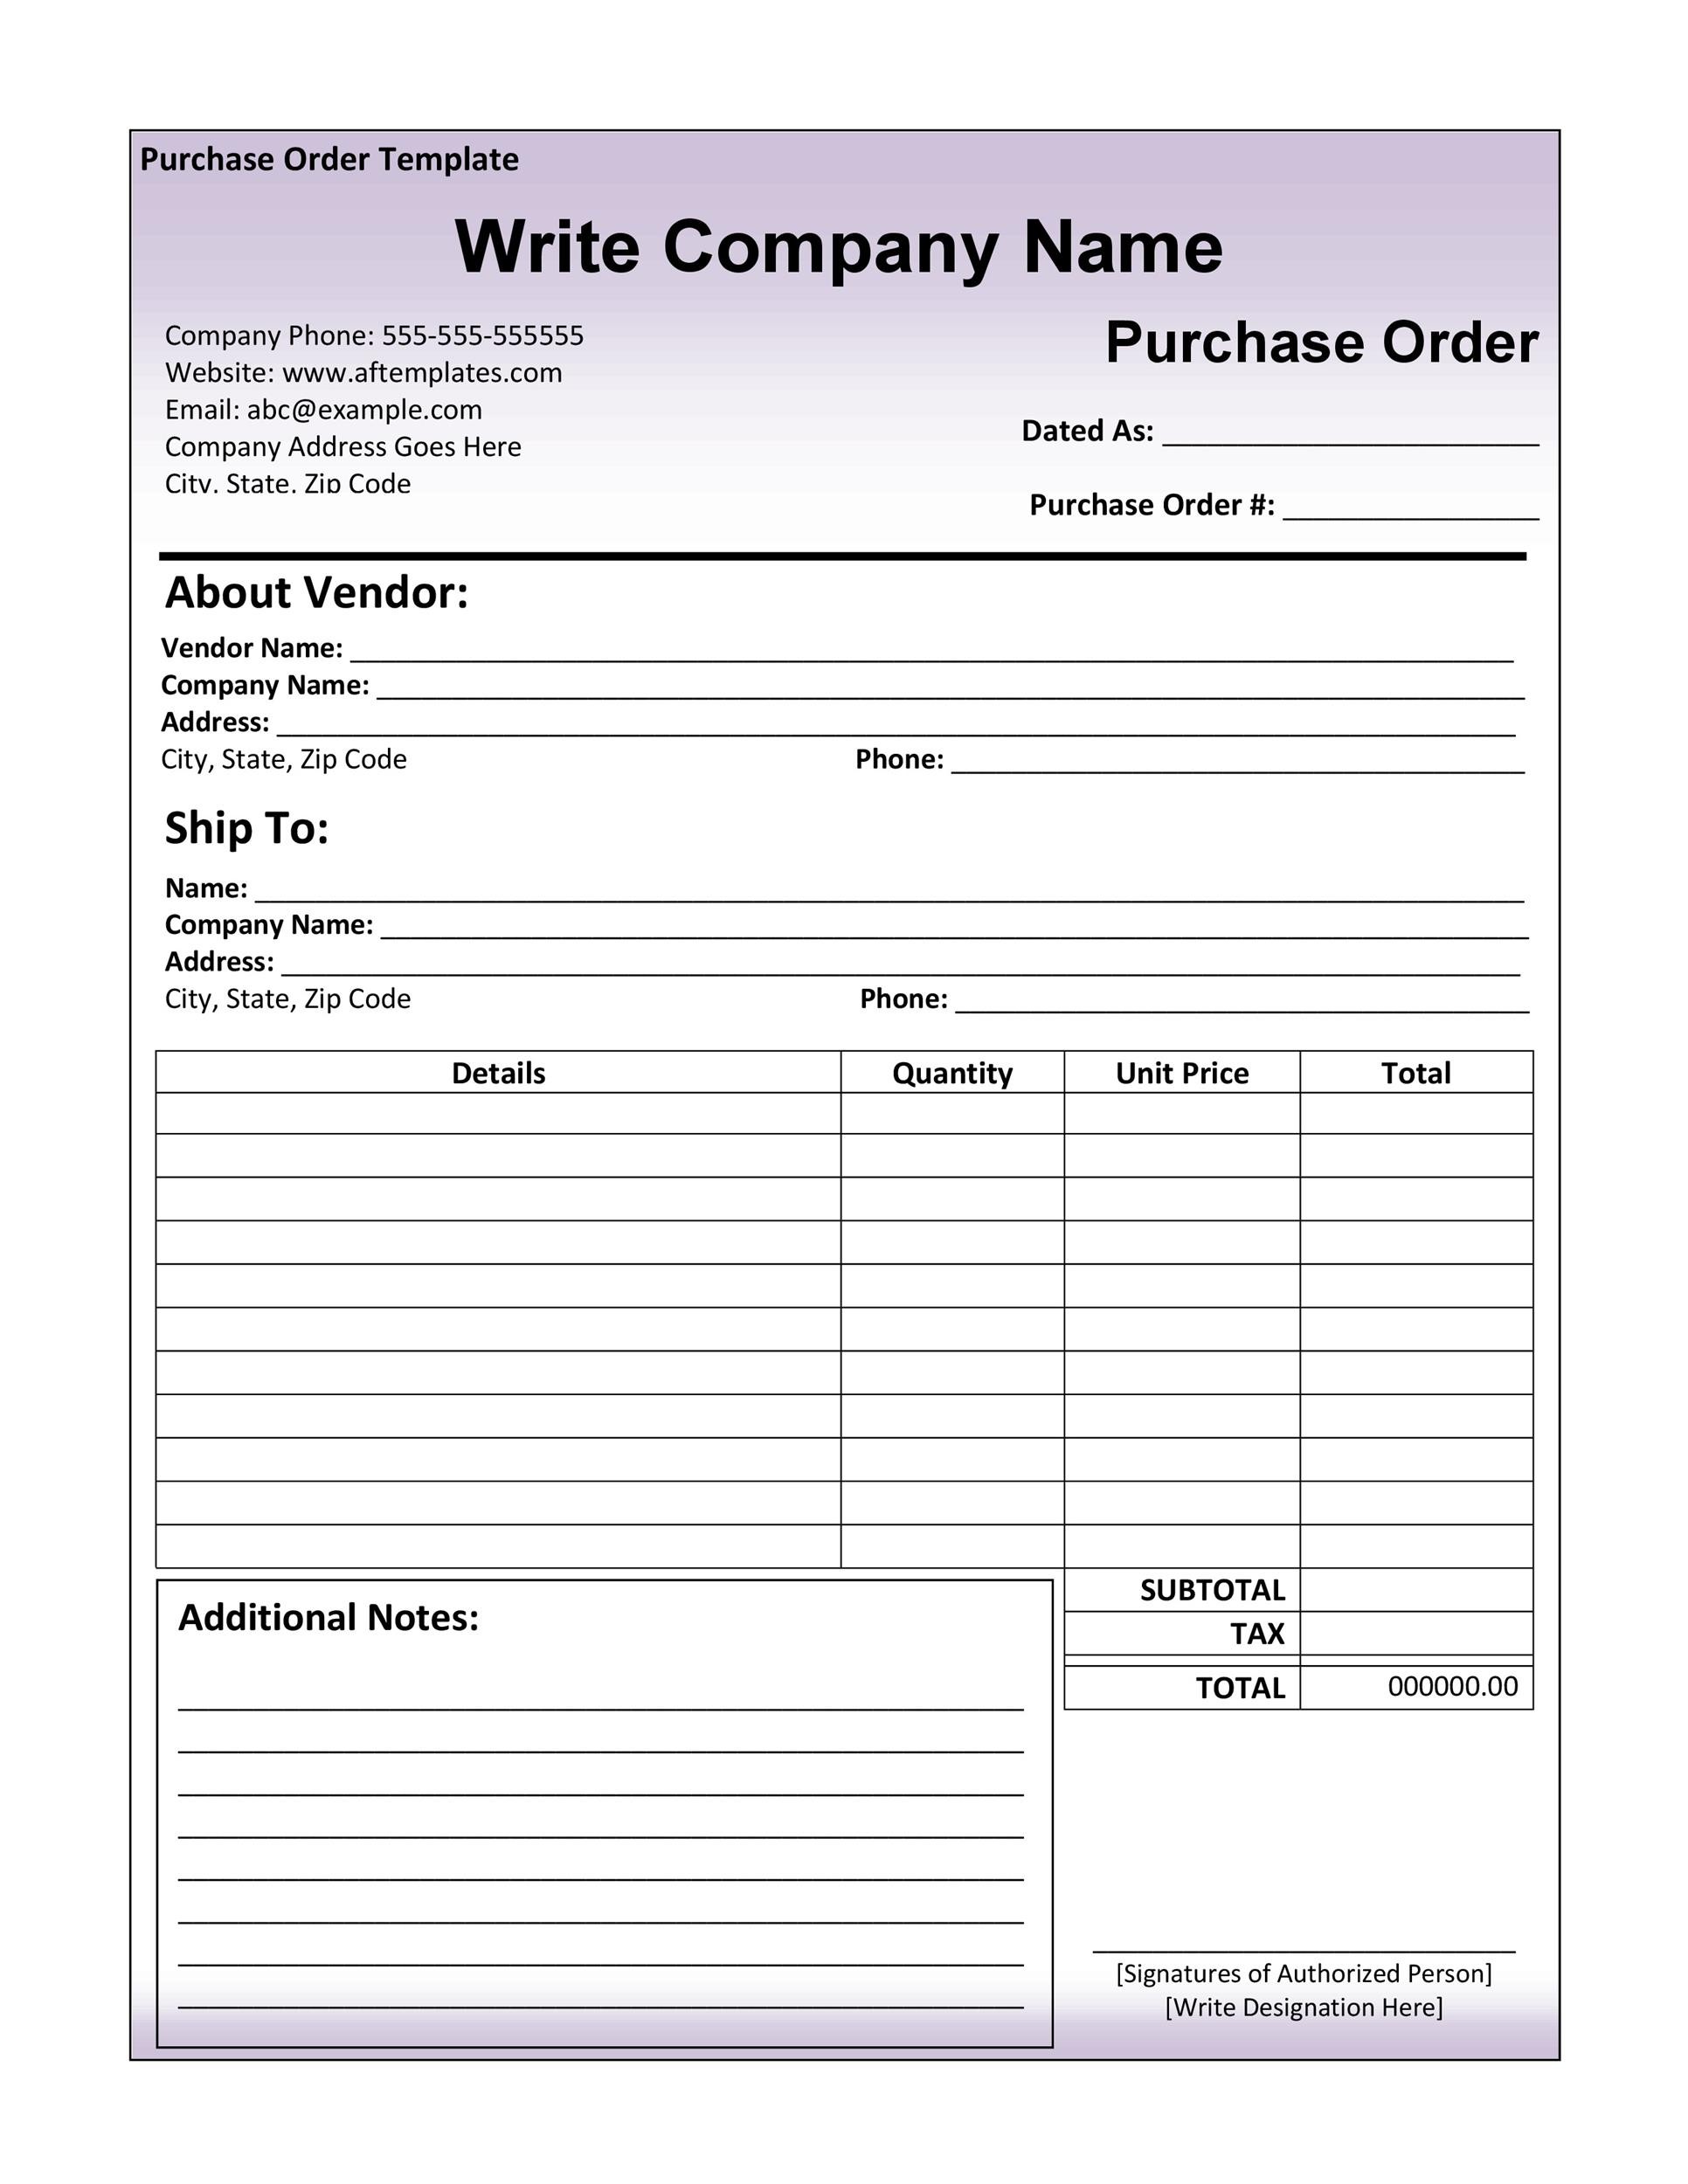 purchase-order-requisition-template-excel-this-is-why